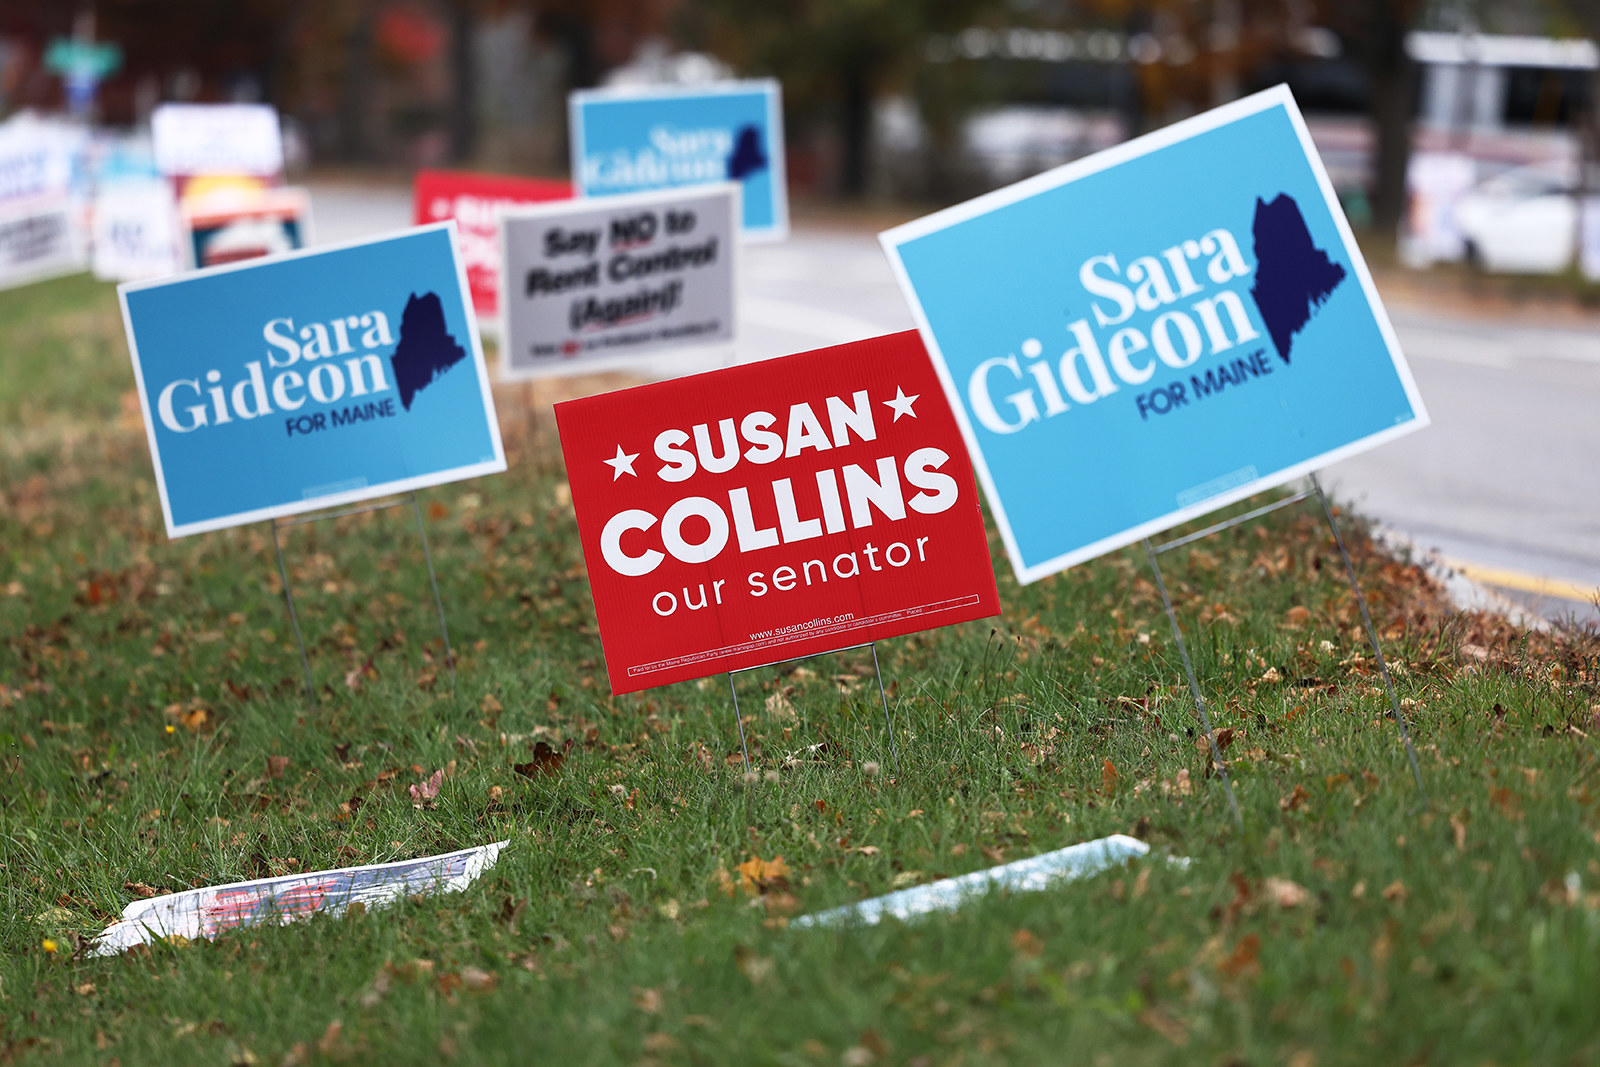 Political yard signs for Democratic candidate Sara Gideon surround one for Republican Sen. Susan Collins